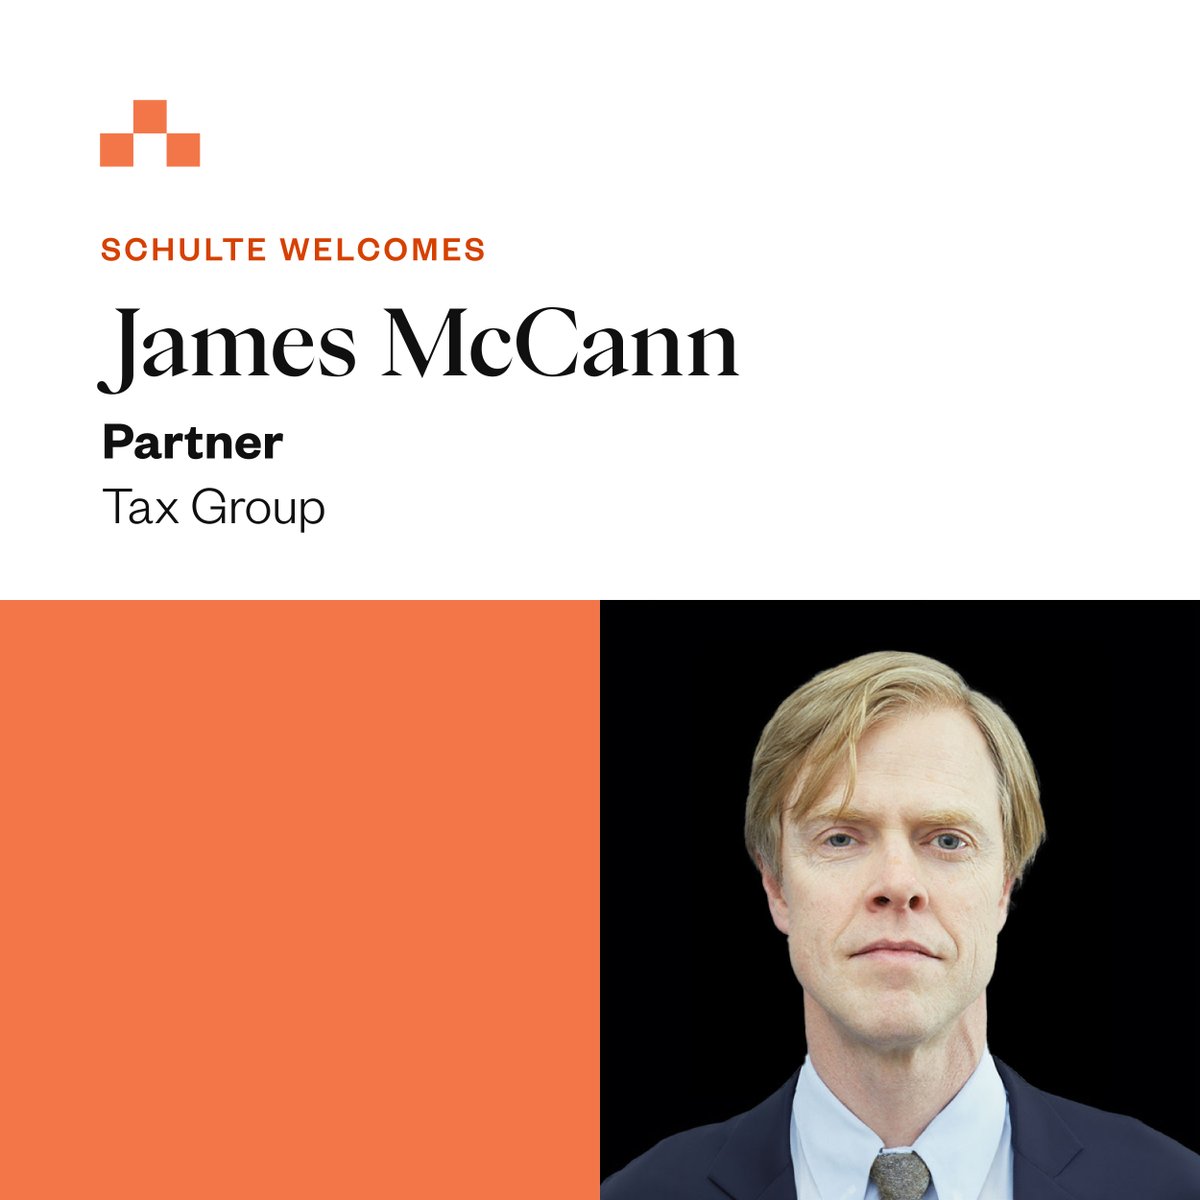 Schulte is pleased to announce that James McCann has joined the firm as partner in the Tax Group. Jim has extensive experience with the tax aspects of structuring, launching and operating private investment funds. 

Read more: bit.ly/3yf9HV7 
#SchulteLaw #NewPartner